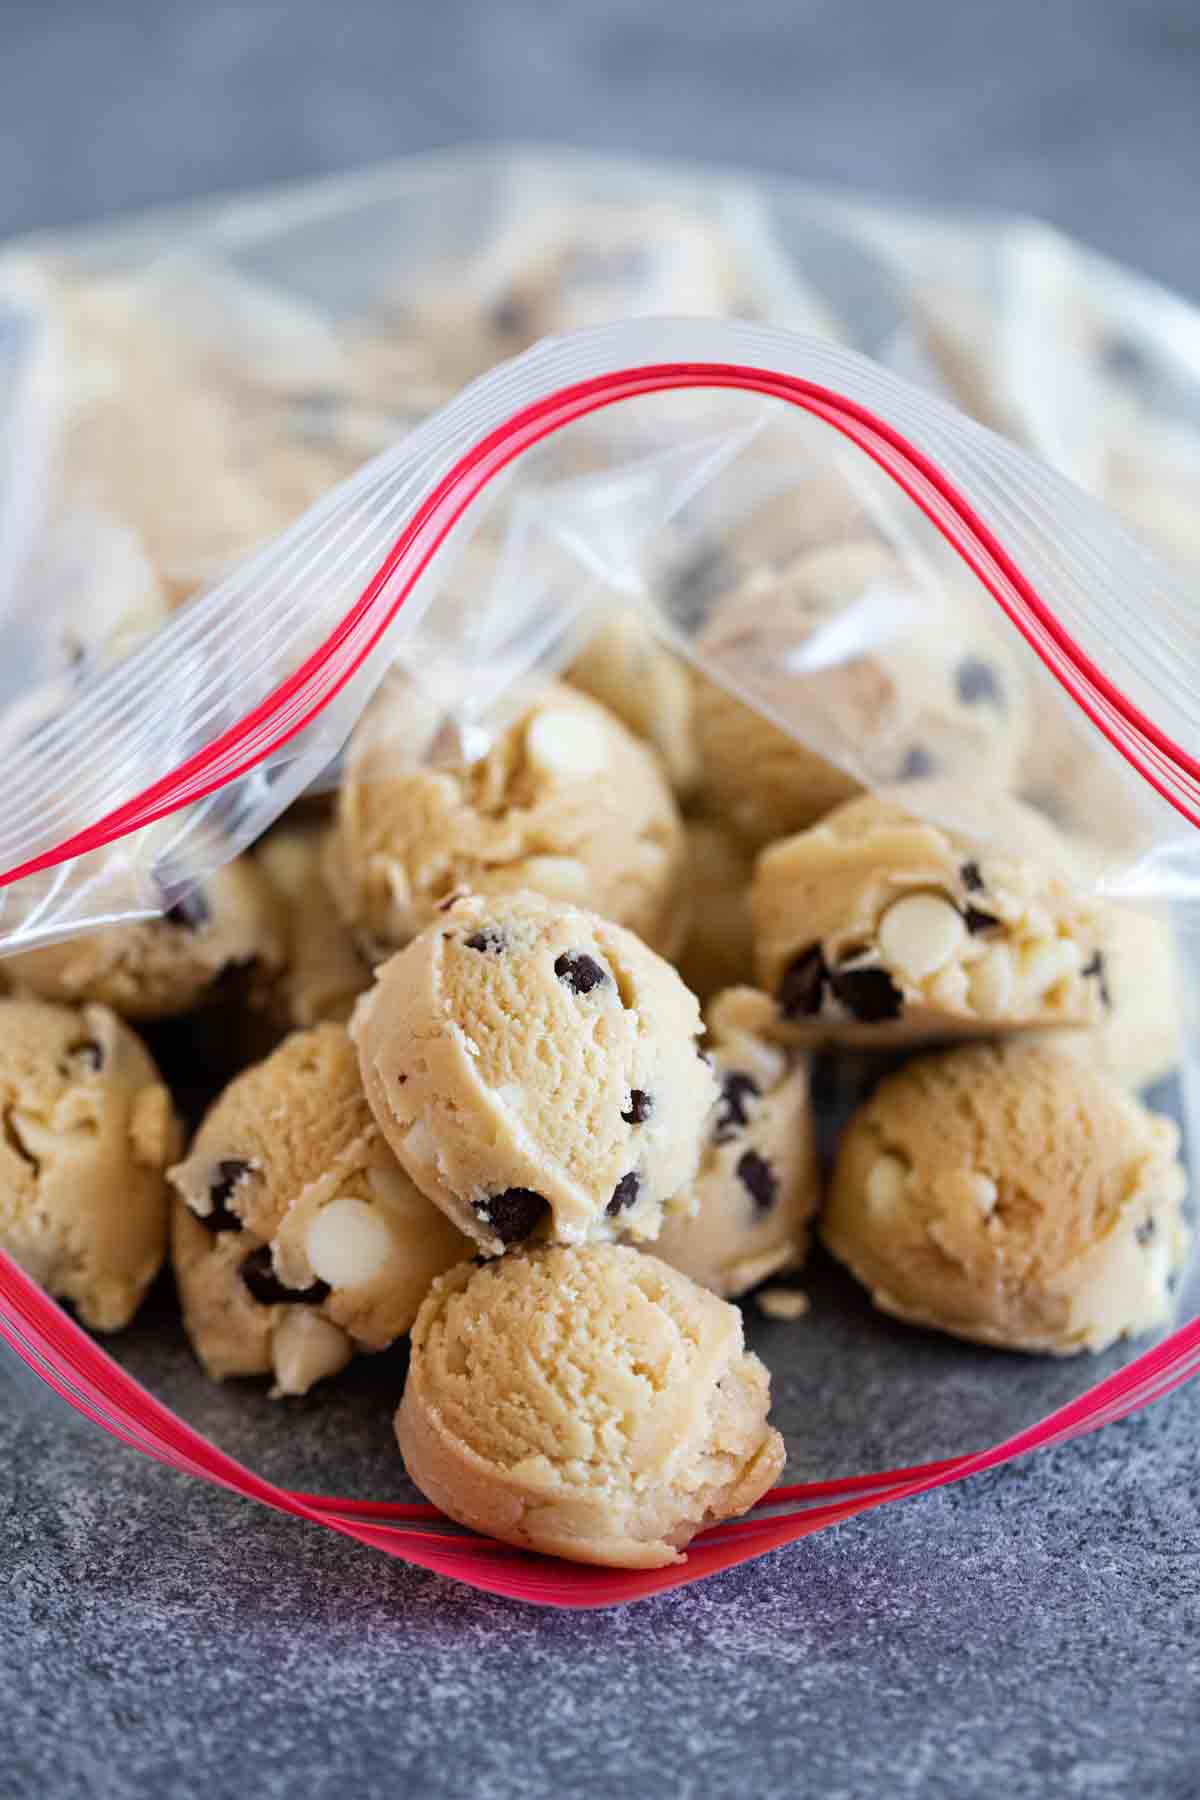 How to Freeze Cookie Dough - Completely Delicious